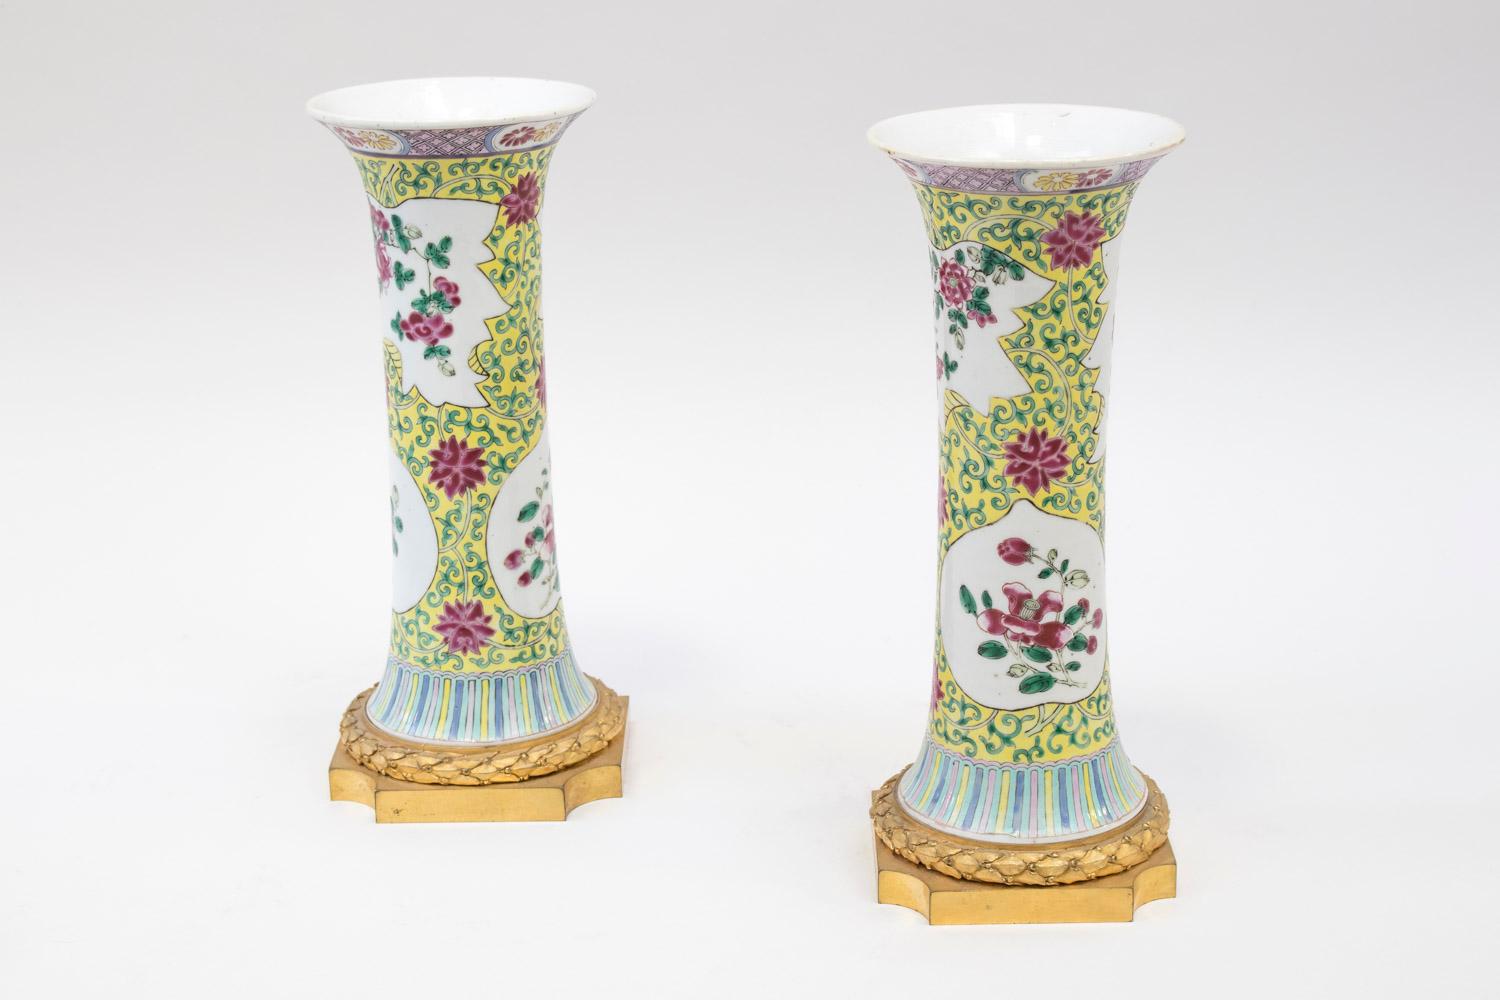 Small gu-form porcelain vases decorated with pink family enamels on a yellow background with green interlaces. Decoration of white background cartouches with pink dahlias.
Geometric friezes on the base and the collar of the vases.
Louis XVI style